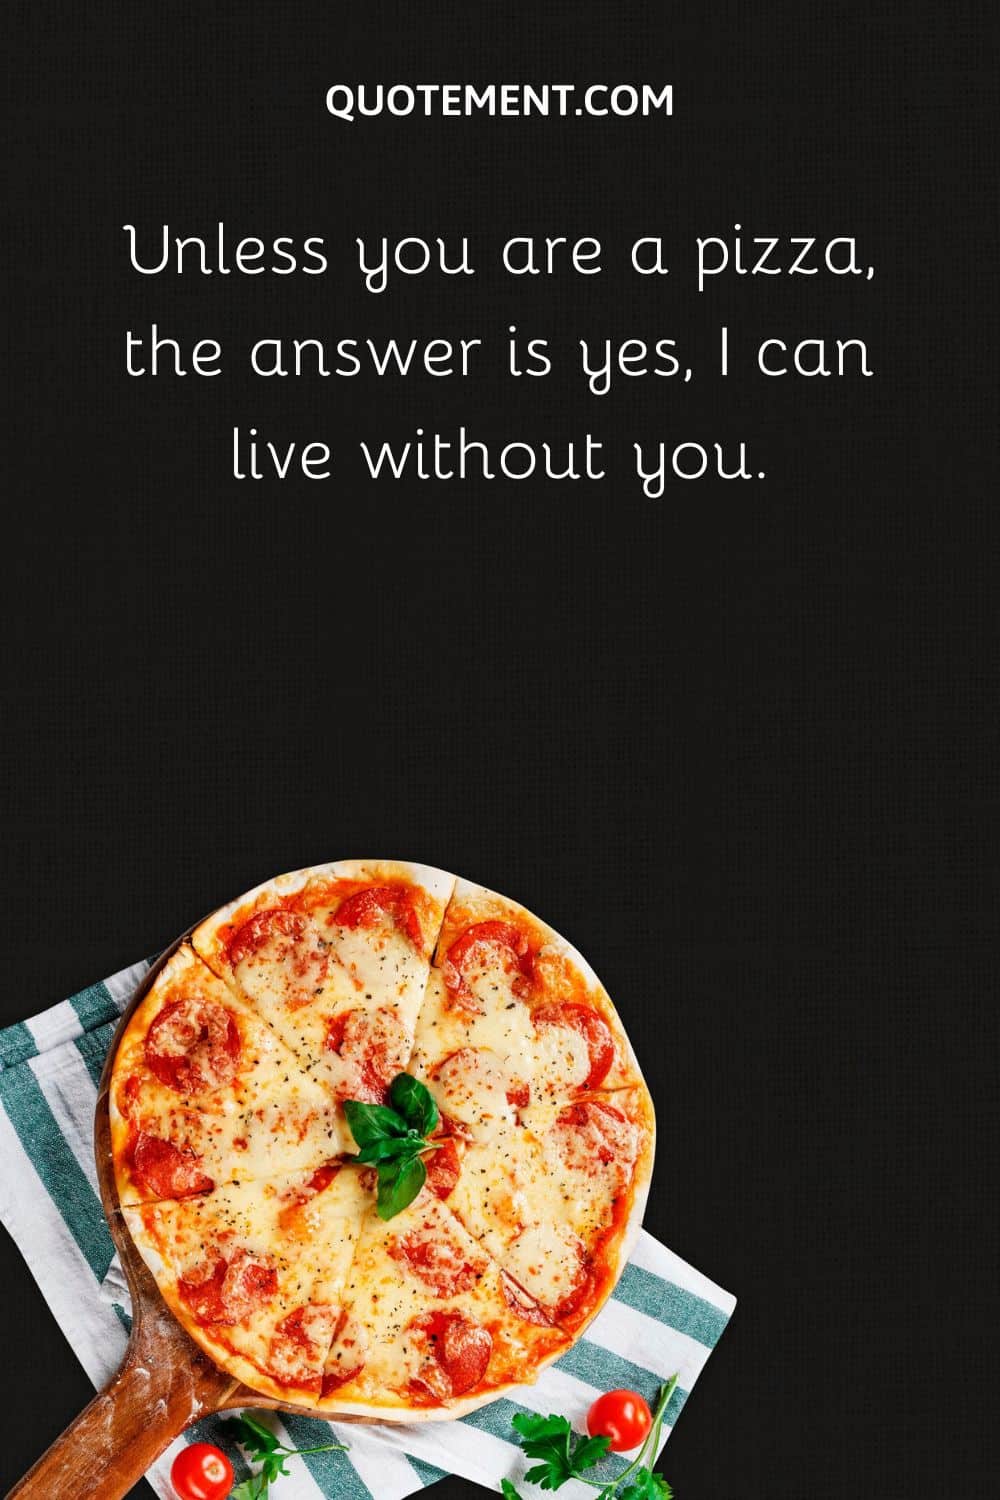 Unless you are a pizza, the answer is yes